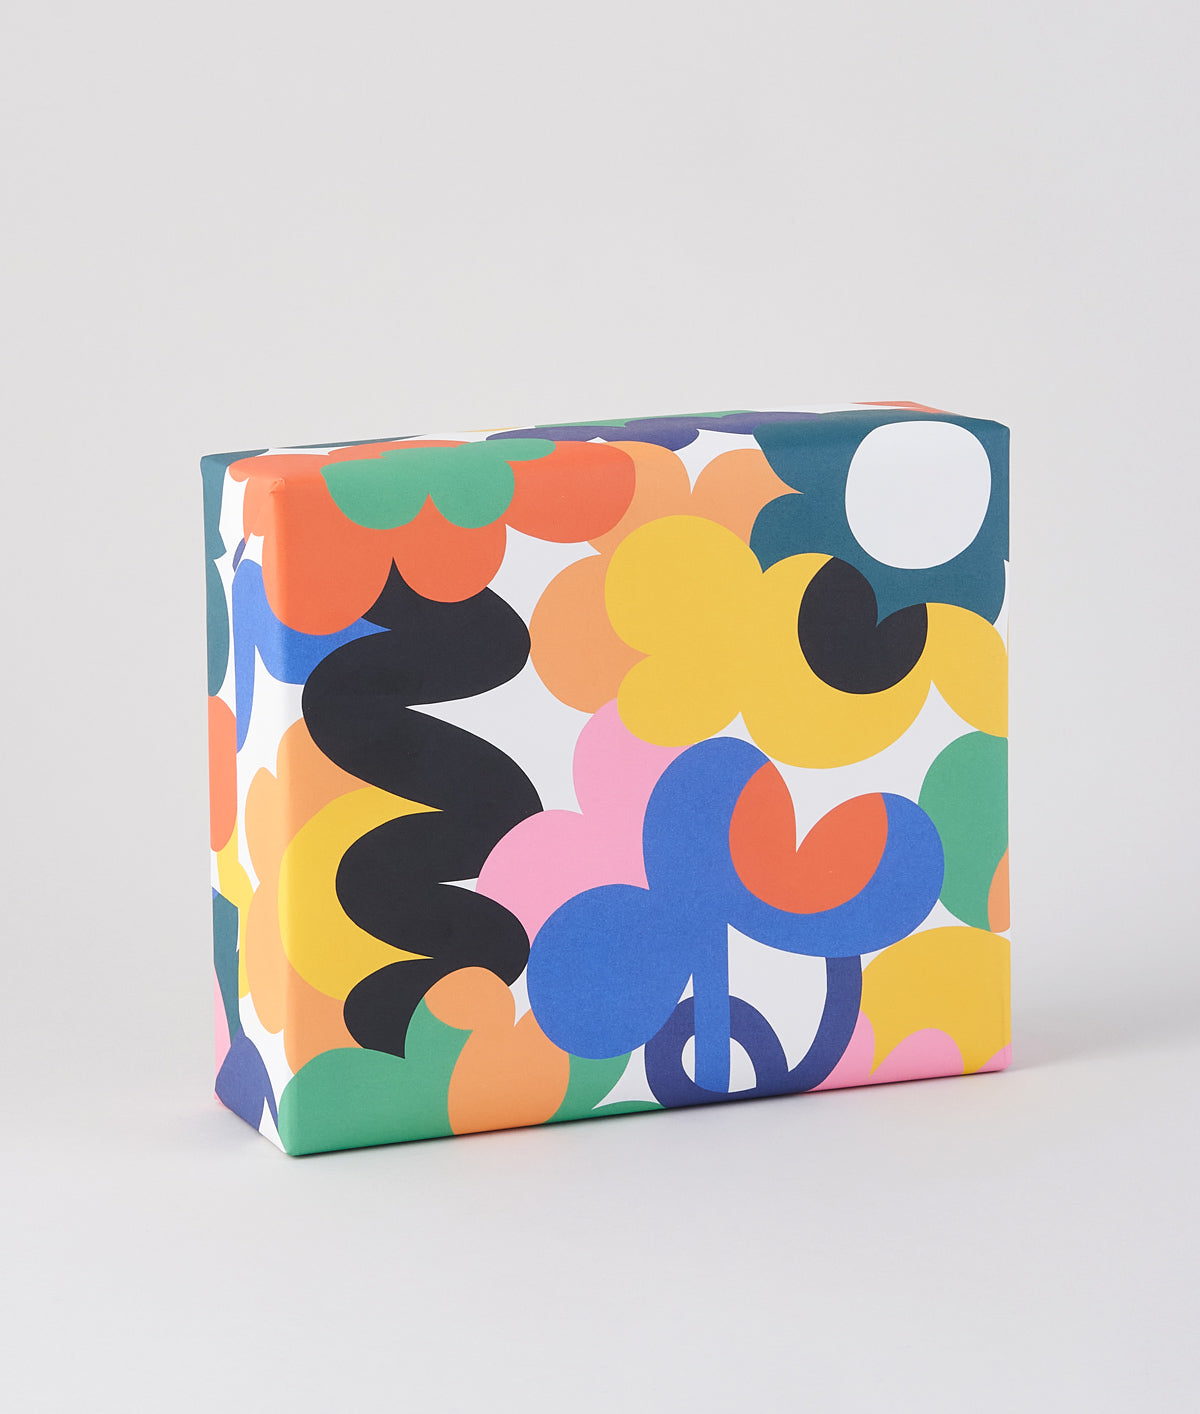 Abstract Flowers wrapping paper